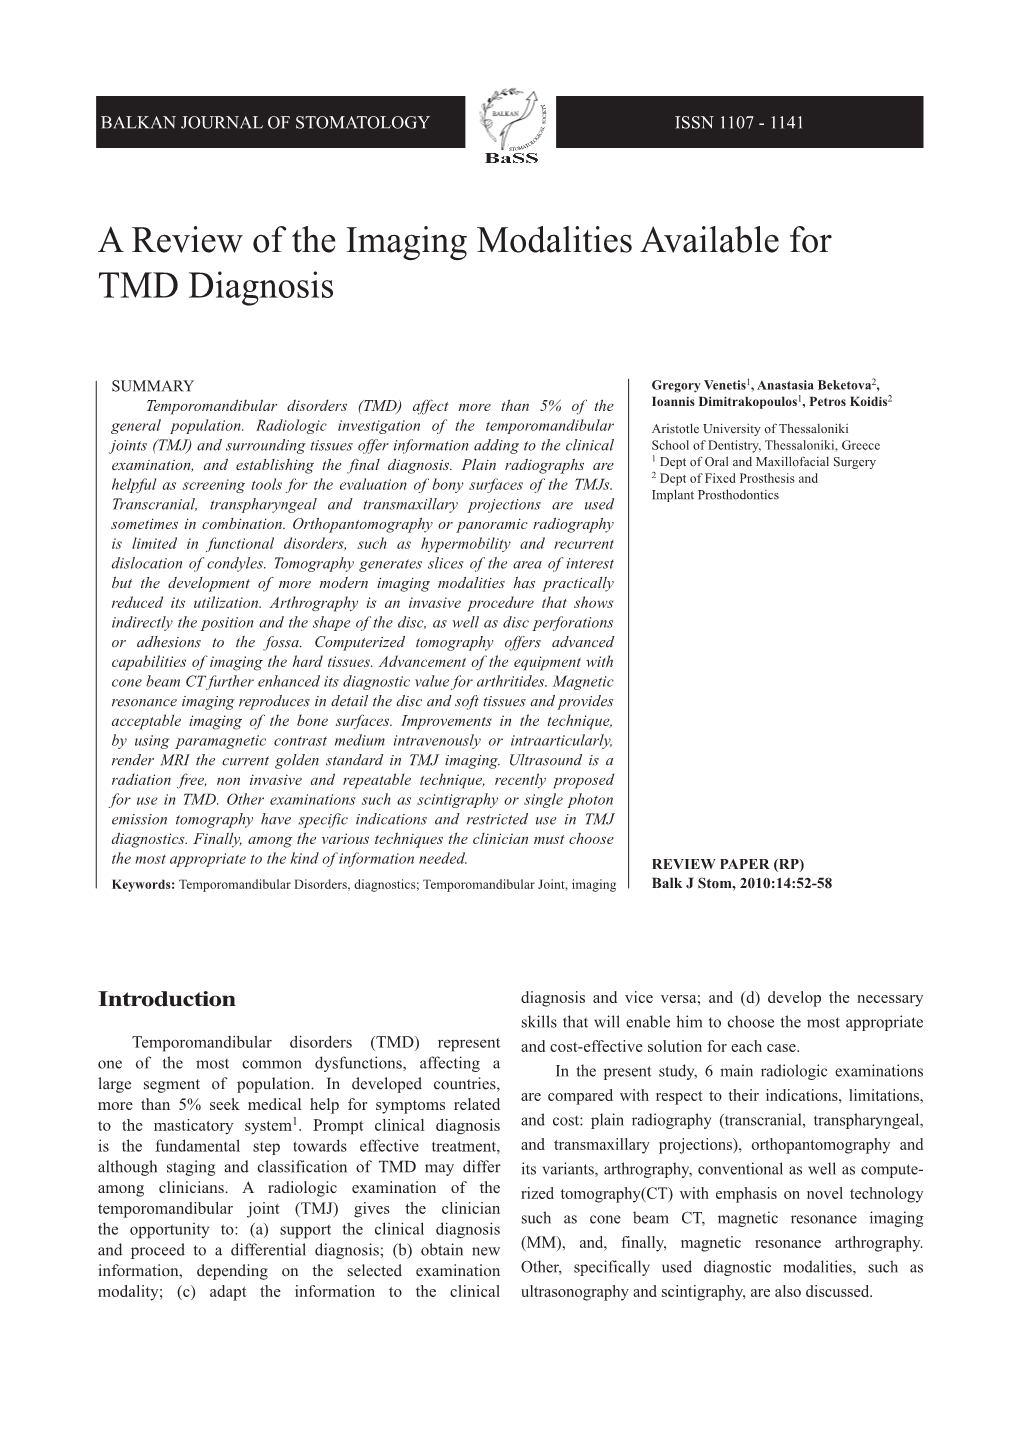 A Review of the Imaging Modalities Available for TMD Diagnosis